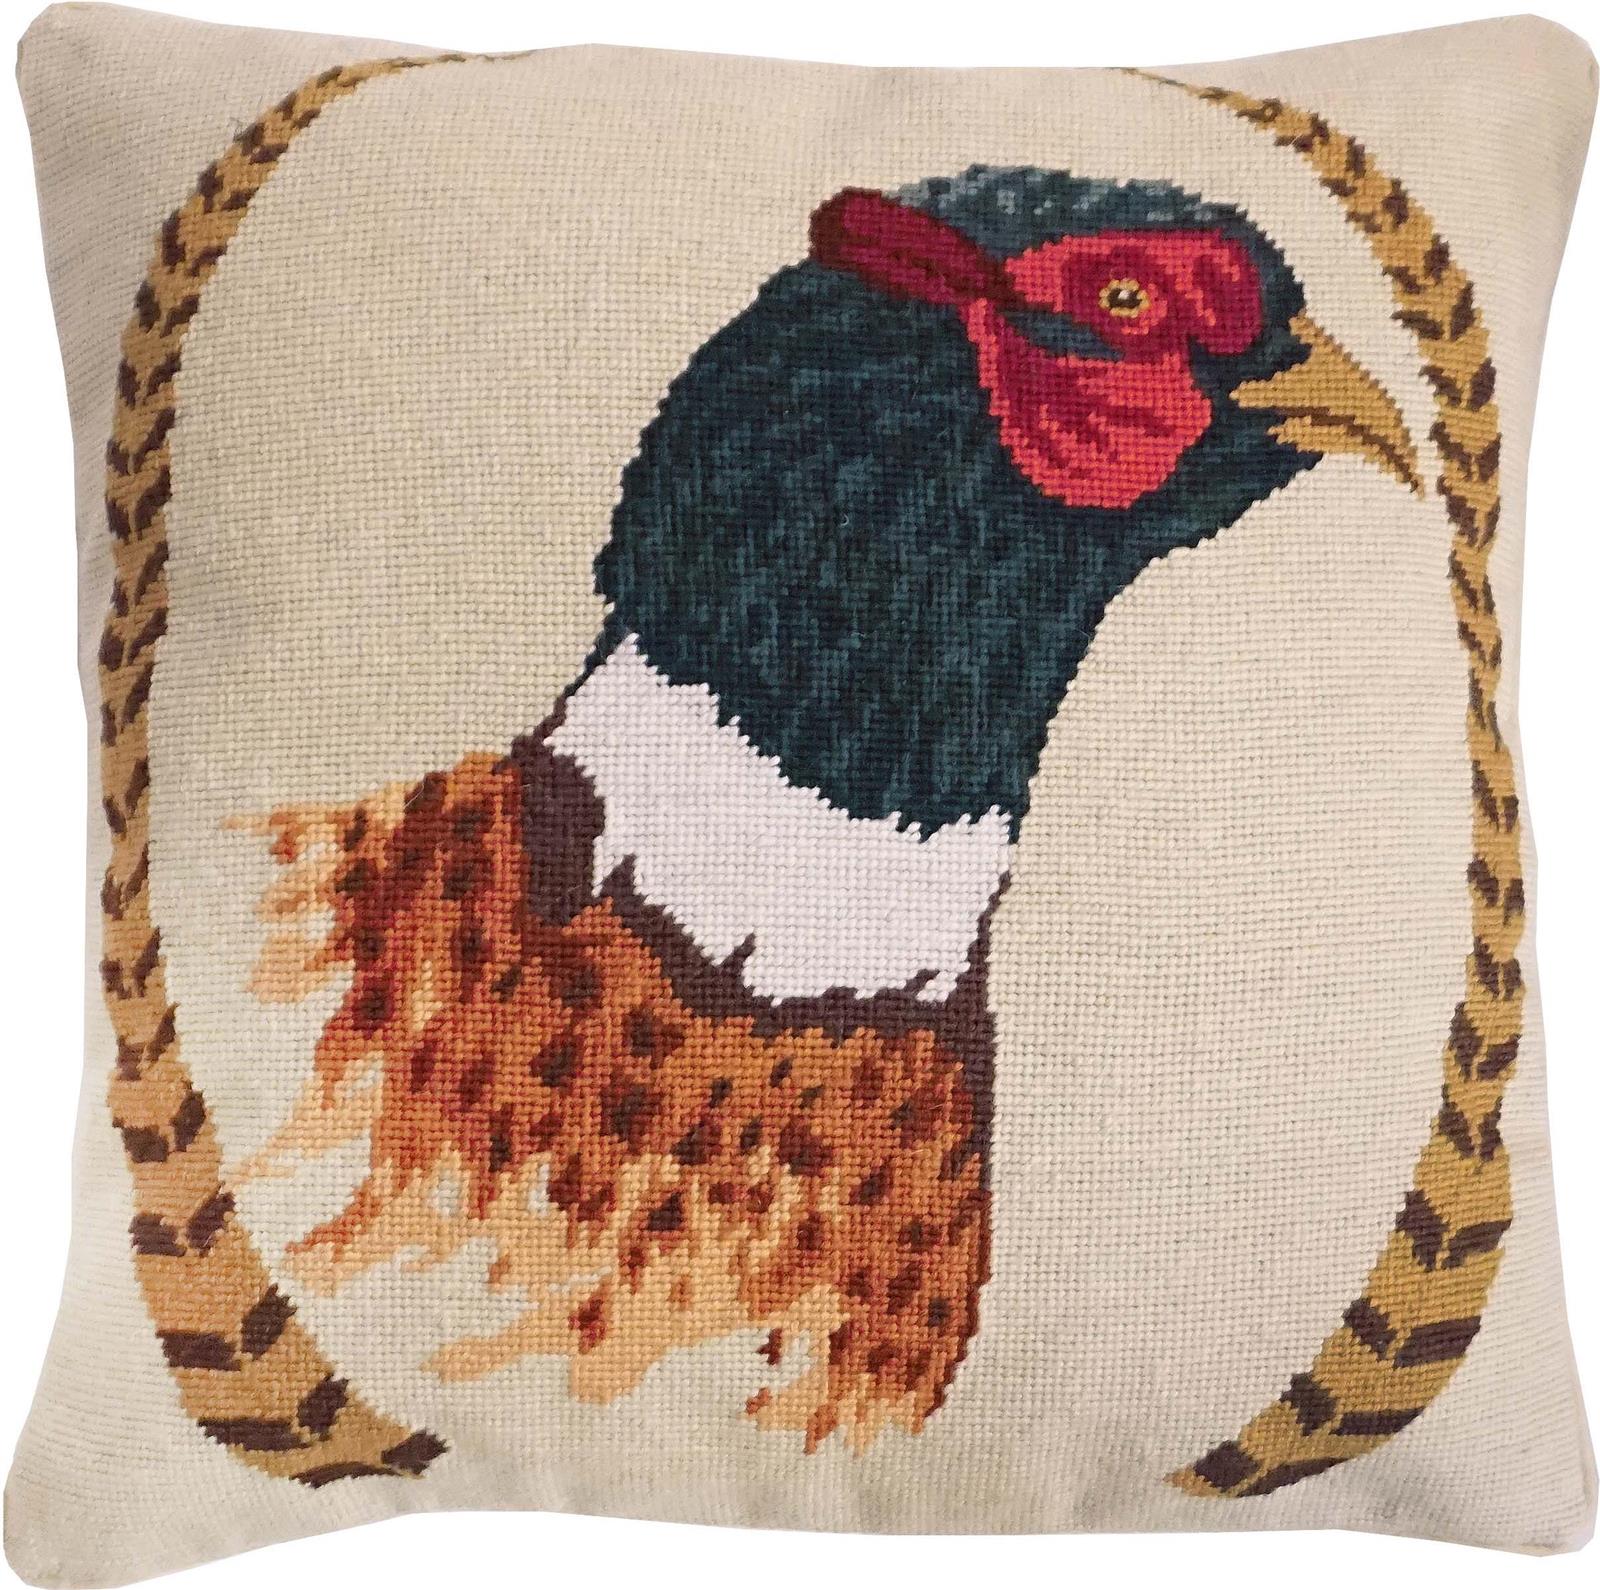 Pillow Throw Pheasant and Feathers 18x18 Beige Cotton Velvet Poly Insert-Image 1